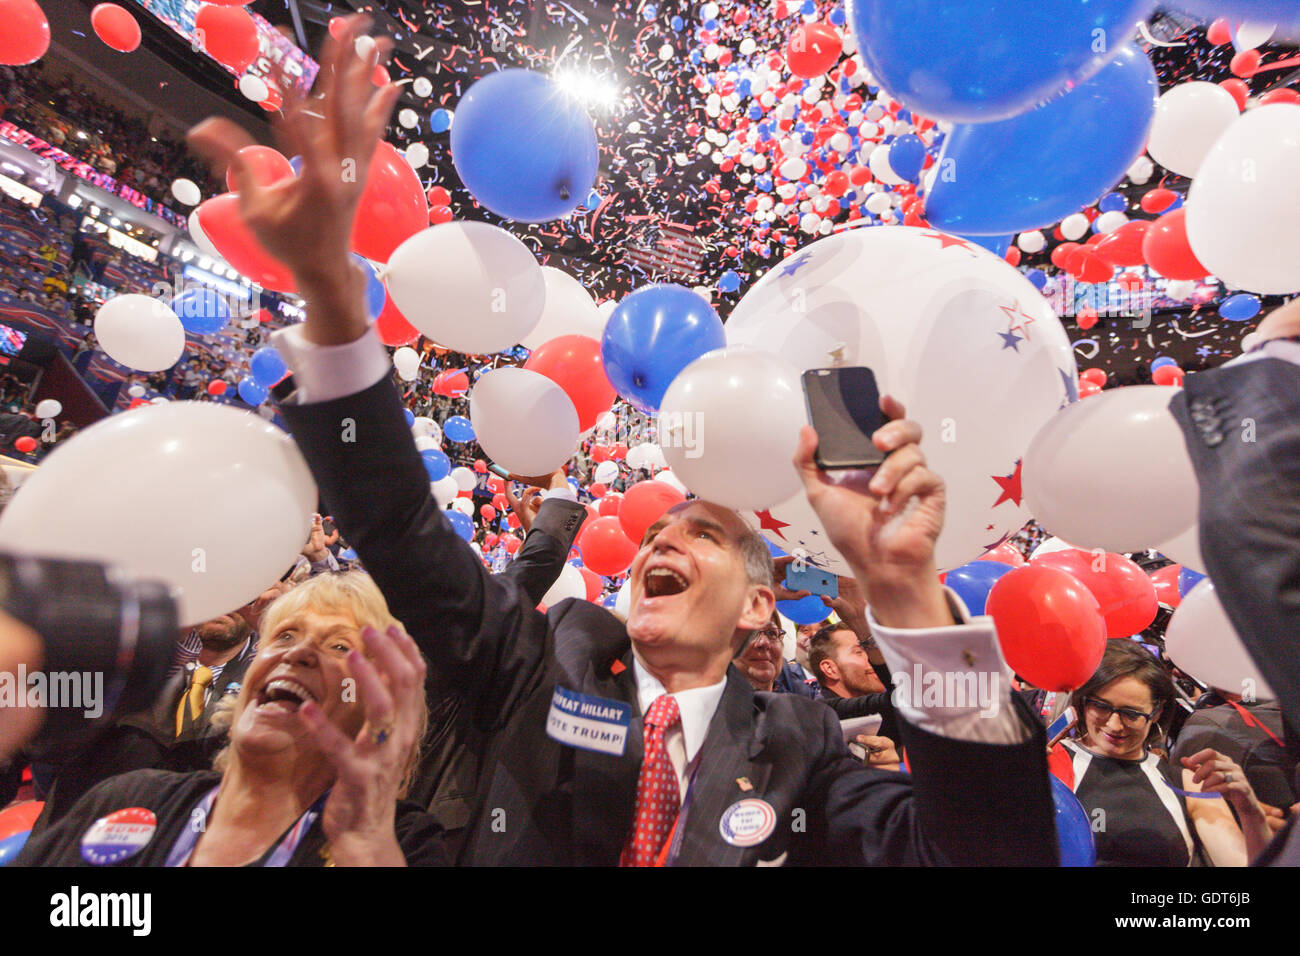 Cleveland, Ohio, USA; July 21, 2016:  Republican National Convention concludes with a balloon drop and confetti. (Philip Scalia/Alamy Live News) Stock Photo